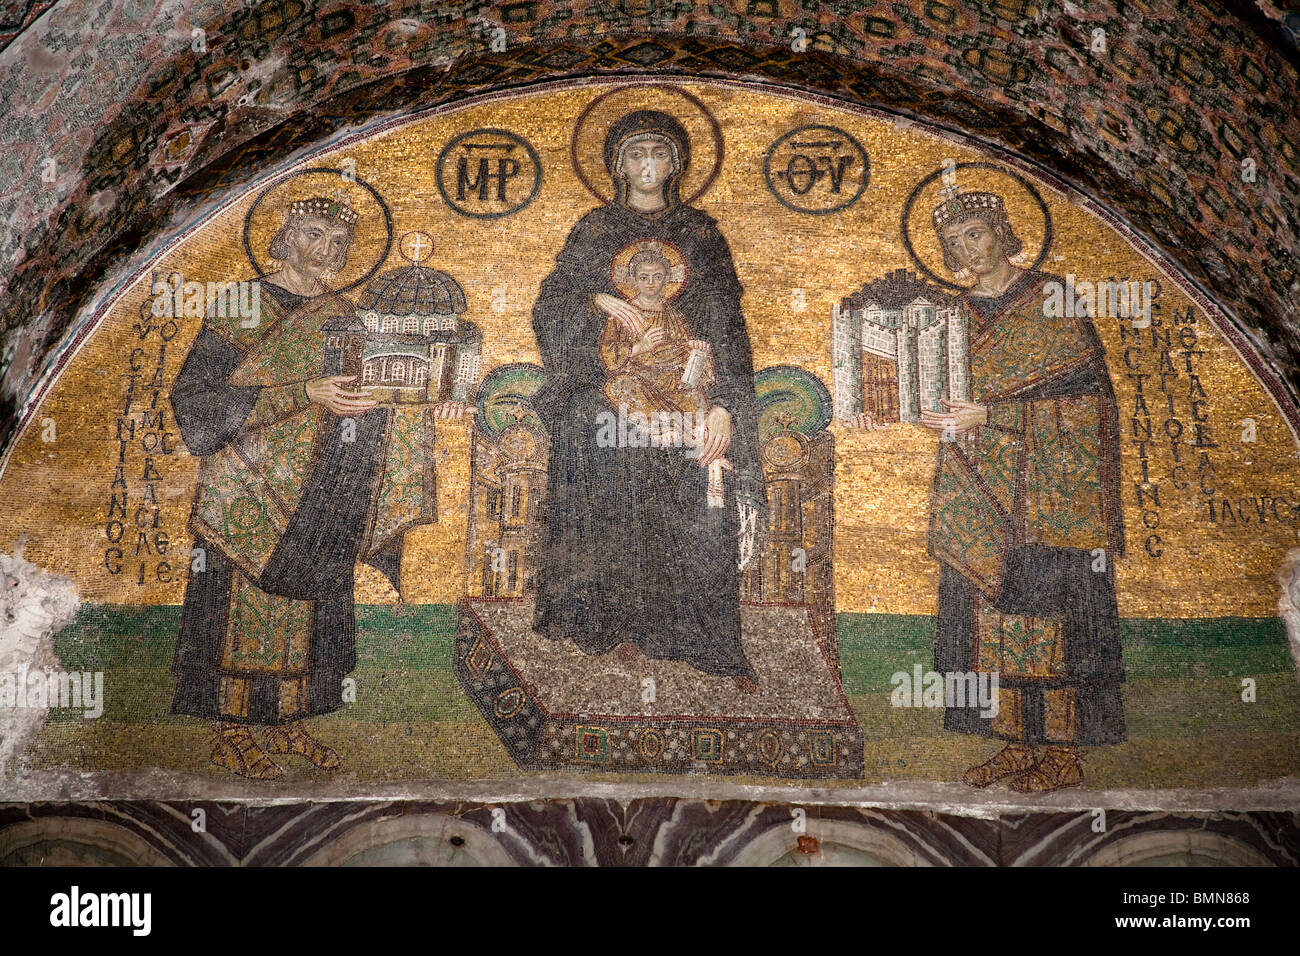 Mosaic of the Virgin Mary, Jesus Christ, Constantine I and Justinian I, Haghia Sophia Mosque, Istanbul, Turkey Stock Photo